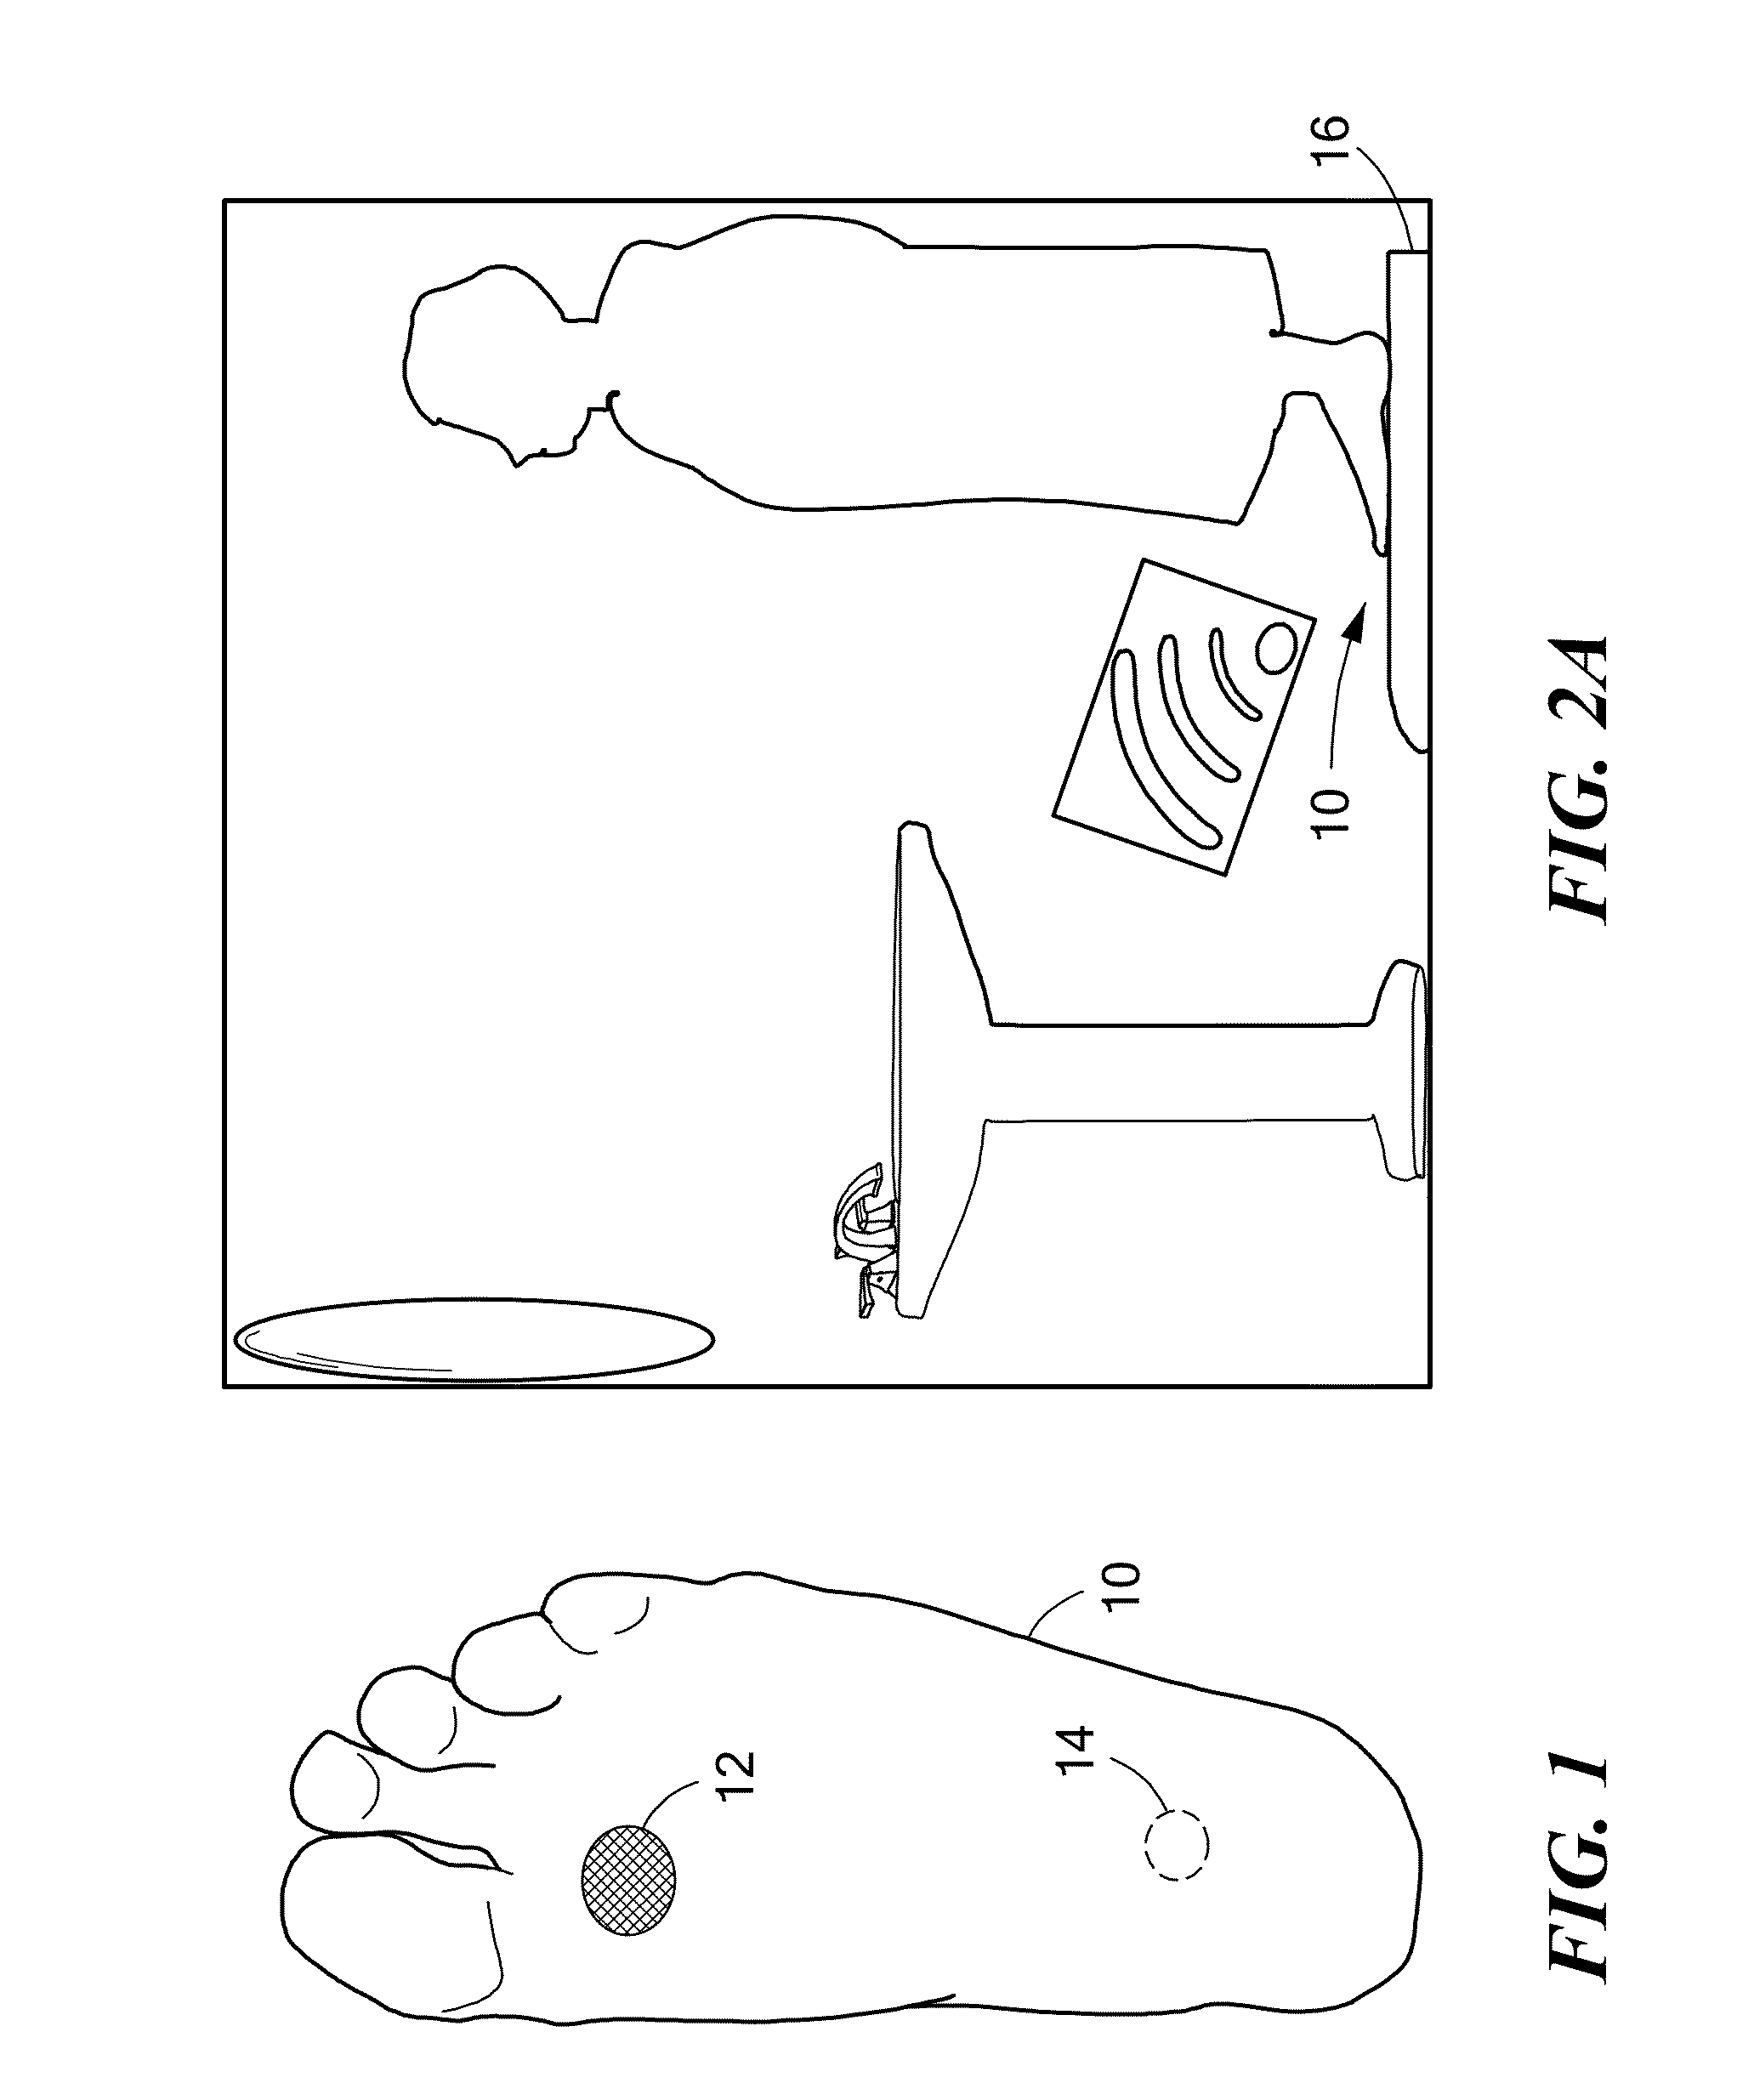 Method and Apparatus for Indicating the Risk of an Emerging Ulcer